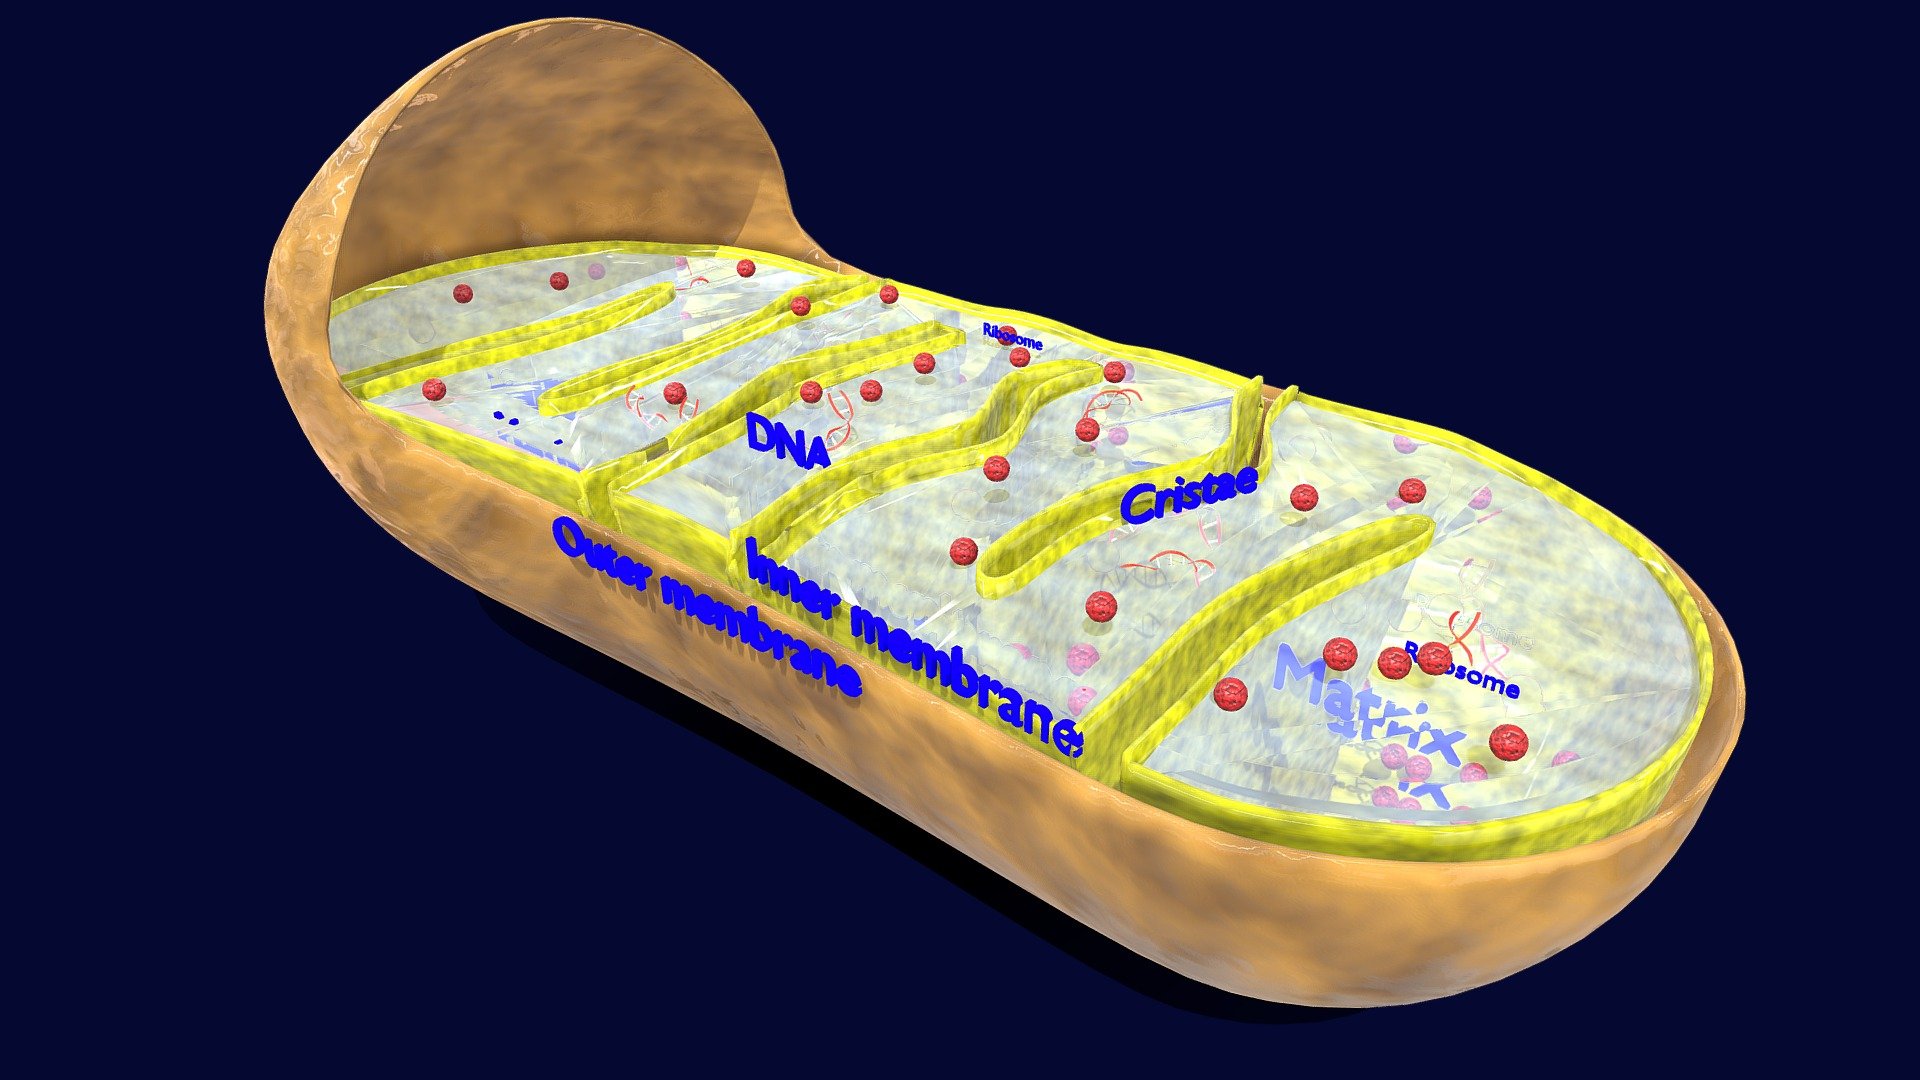 https://youtu.be/GB-EBzmjDTA    https://youtu.be/aNbzyHkDQrM
A blend file model of the Mitochondria (the subcellular organelle that generates energy molecule ATP from glucose). All the parts are neatly labelled and medically accurate. The parts shown in this model are membrane (inner and outer), cristae, matrix, DNA, ribosomes. A teaching model for science students - Mitochondria Microscopy detailed labelled - Buy Royalty Free 3D model by Deepankar.Parmar 3d model